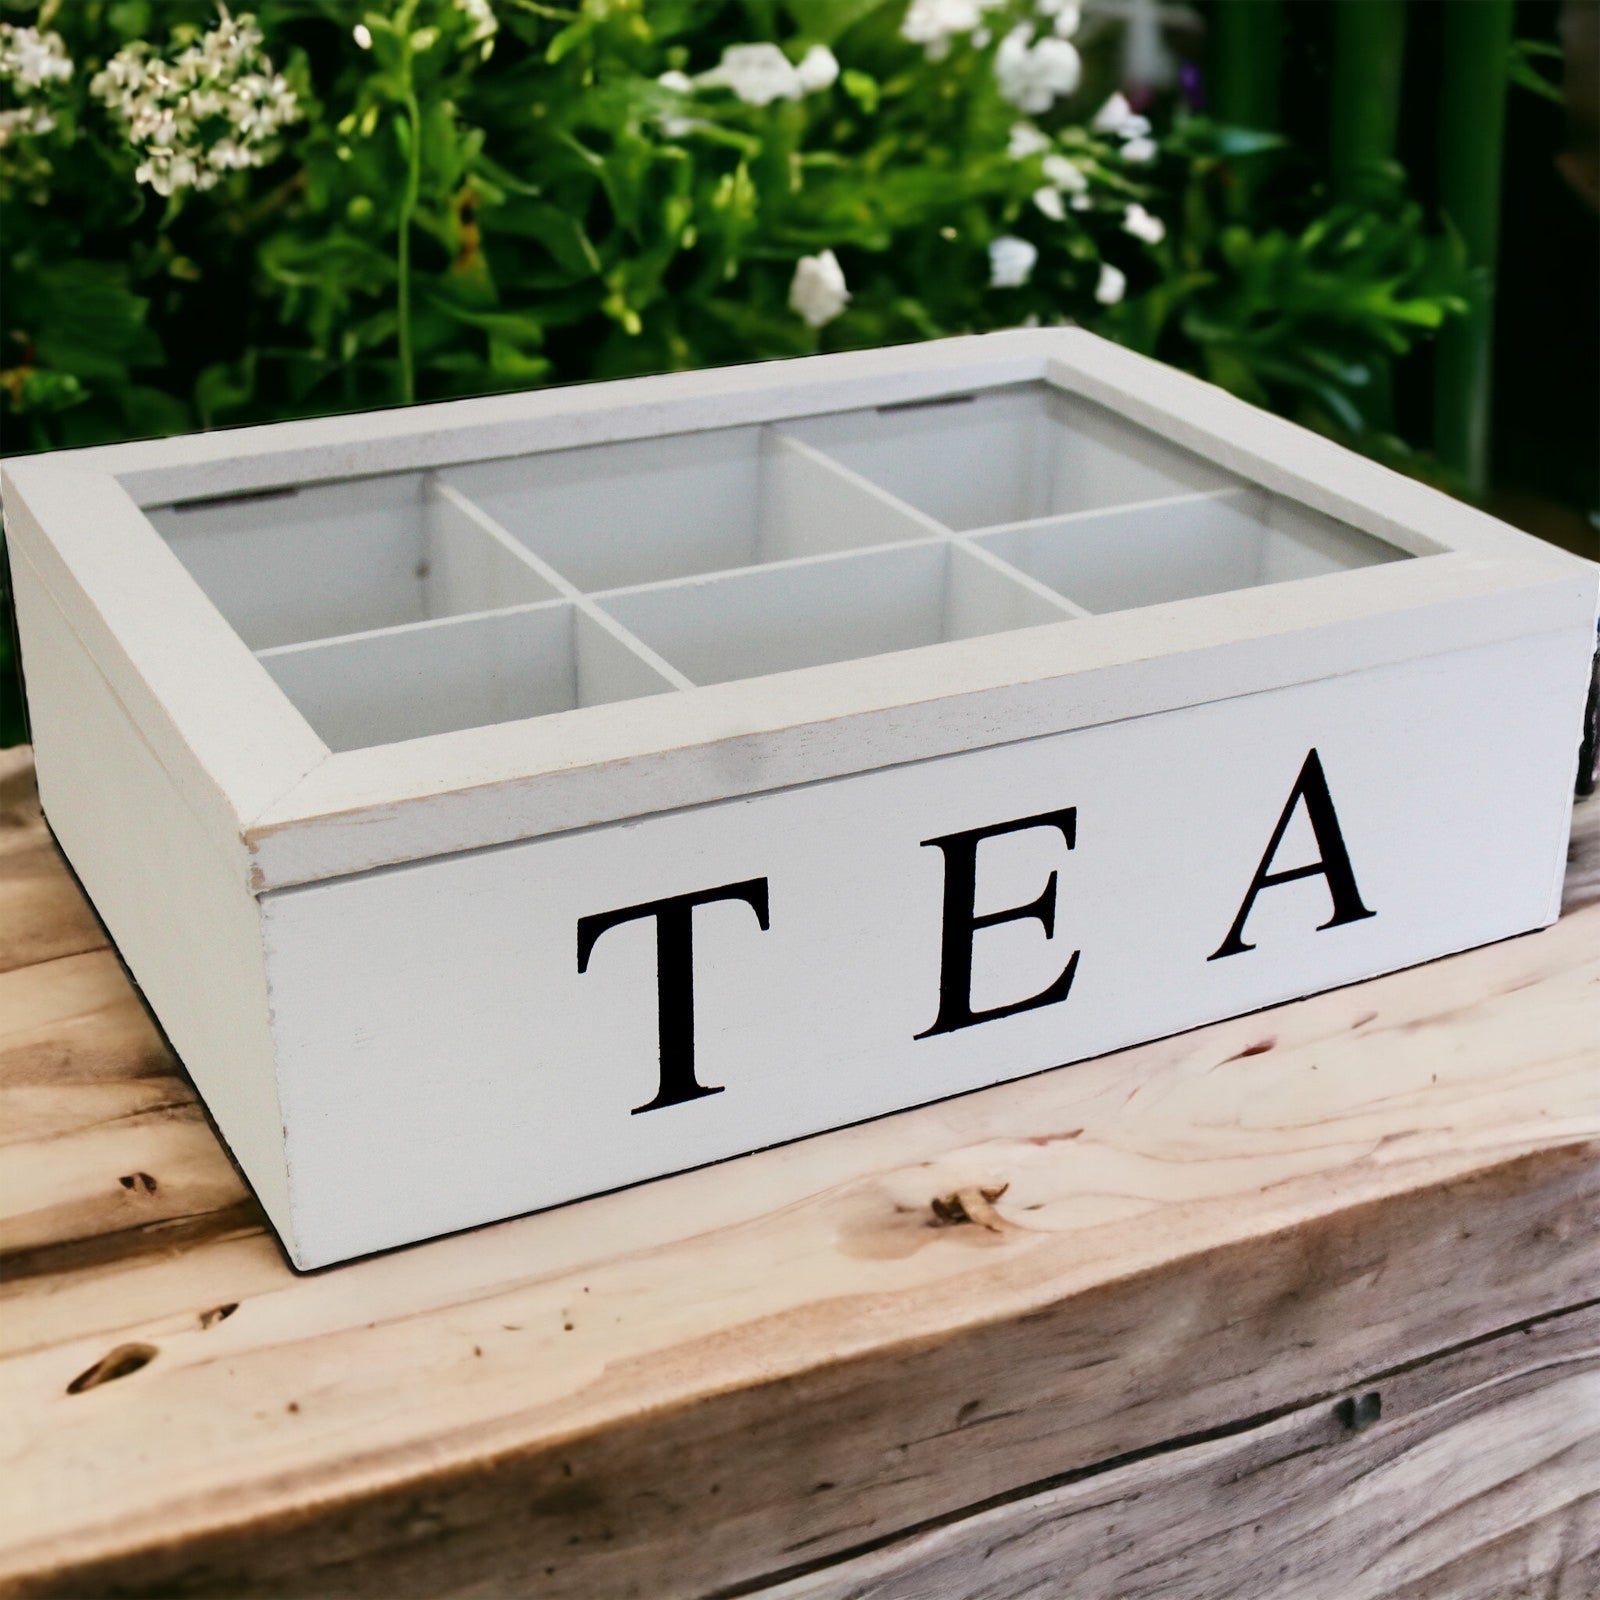 Tea Box French White Classic Med - The Renmy Store Homewares & Gifts 